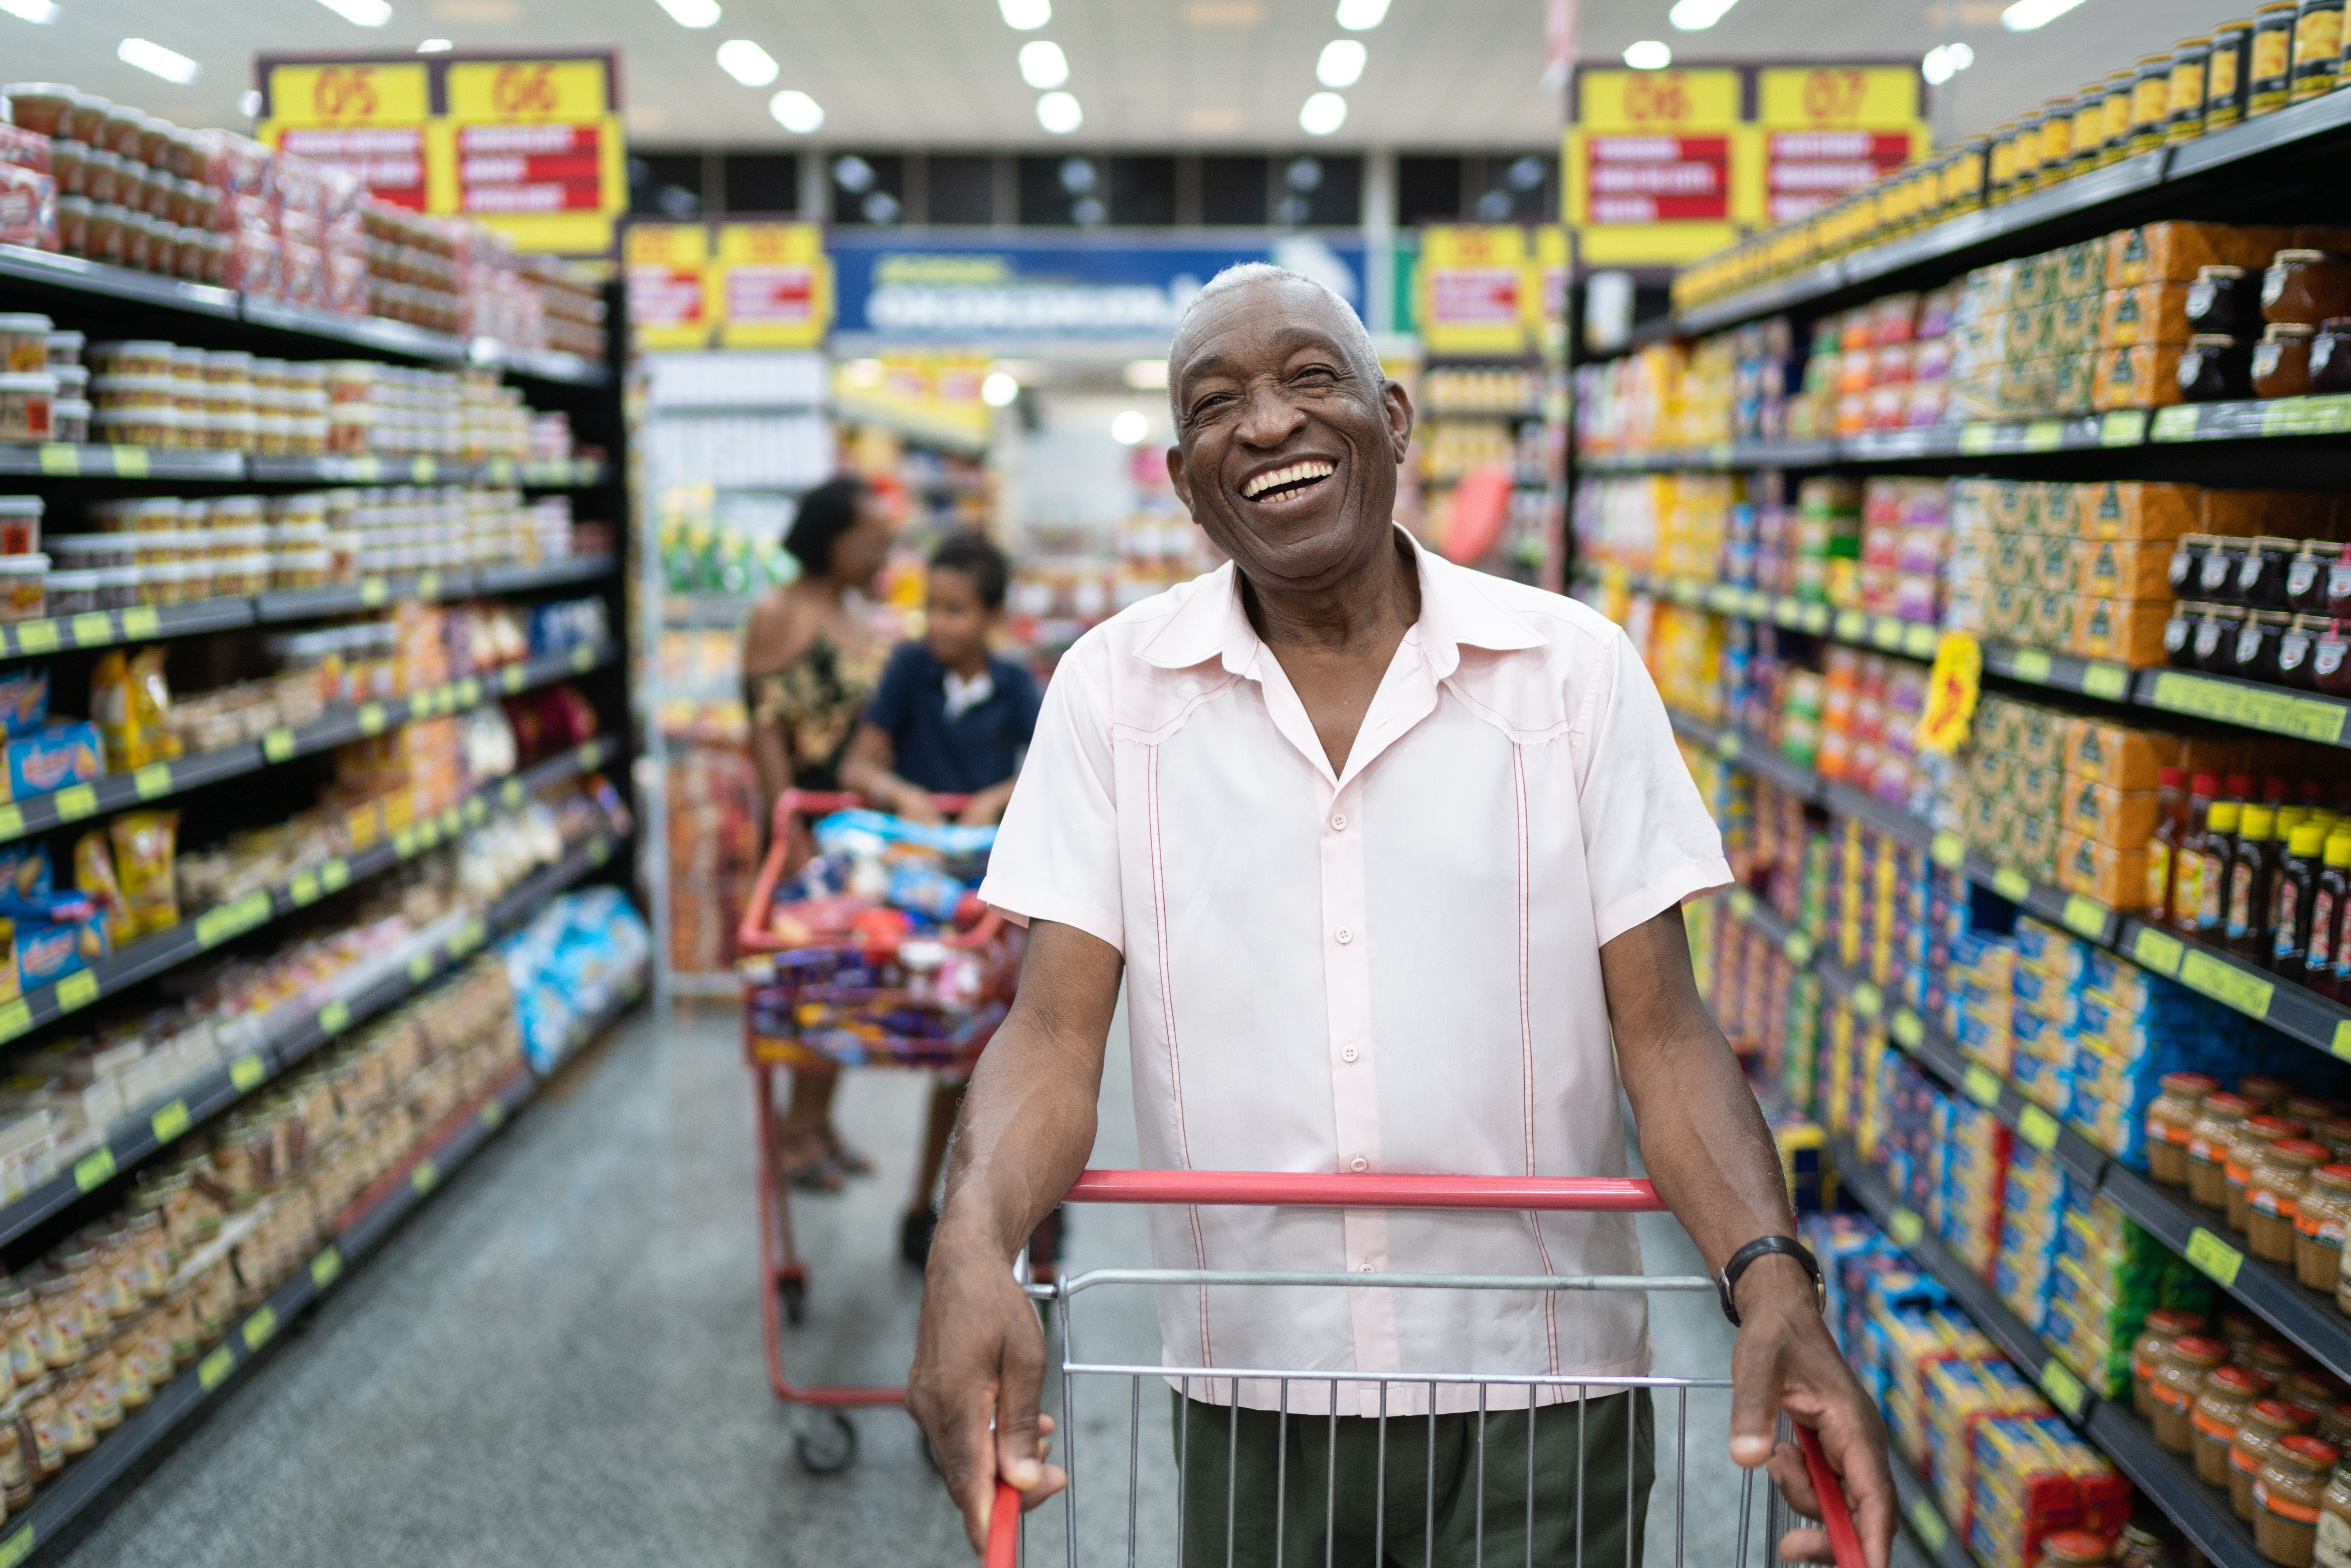 Afro senior at the supermarket portrait | Source: Getty Images